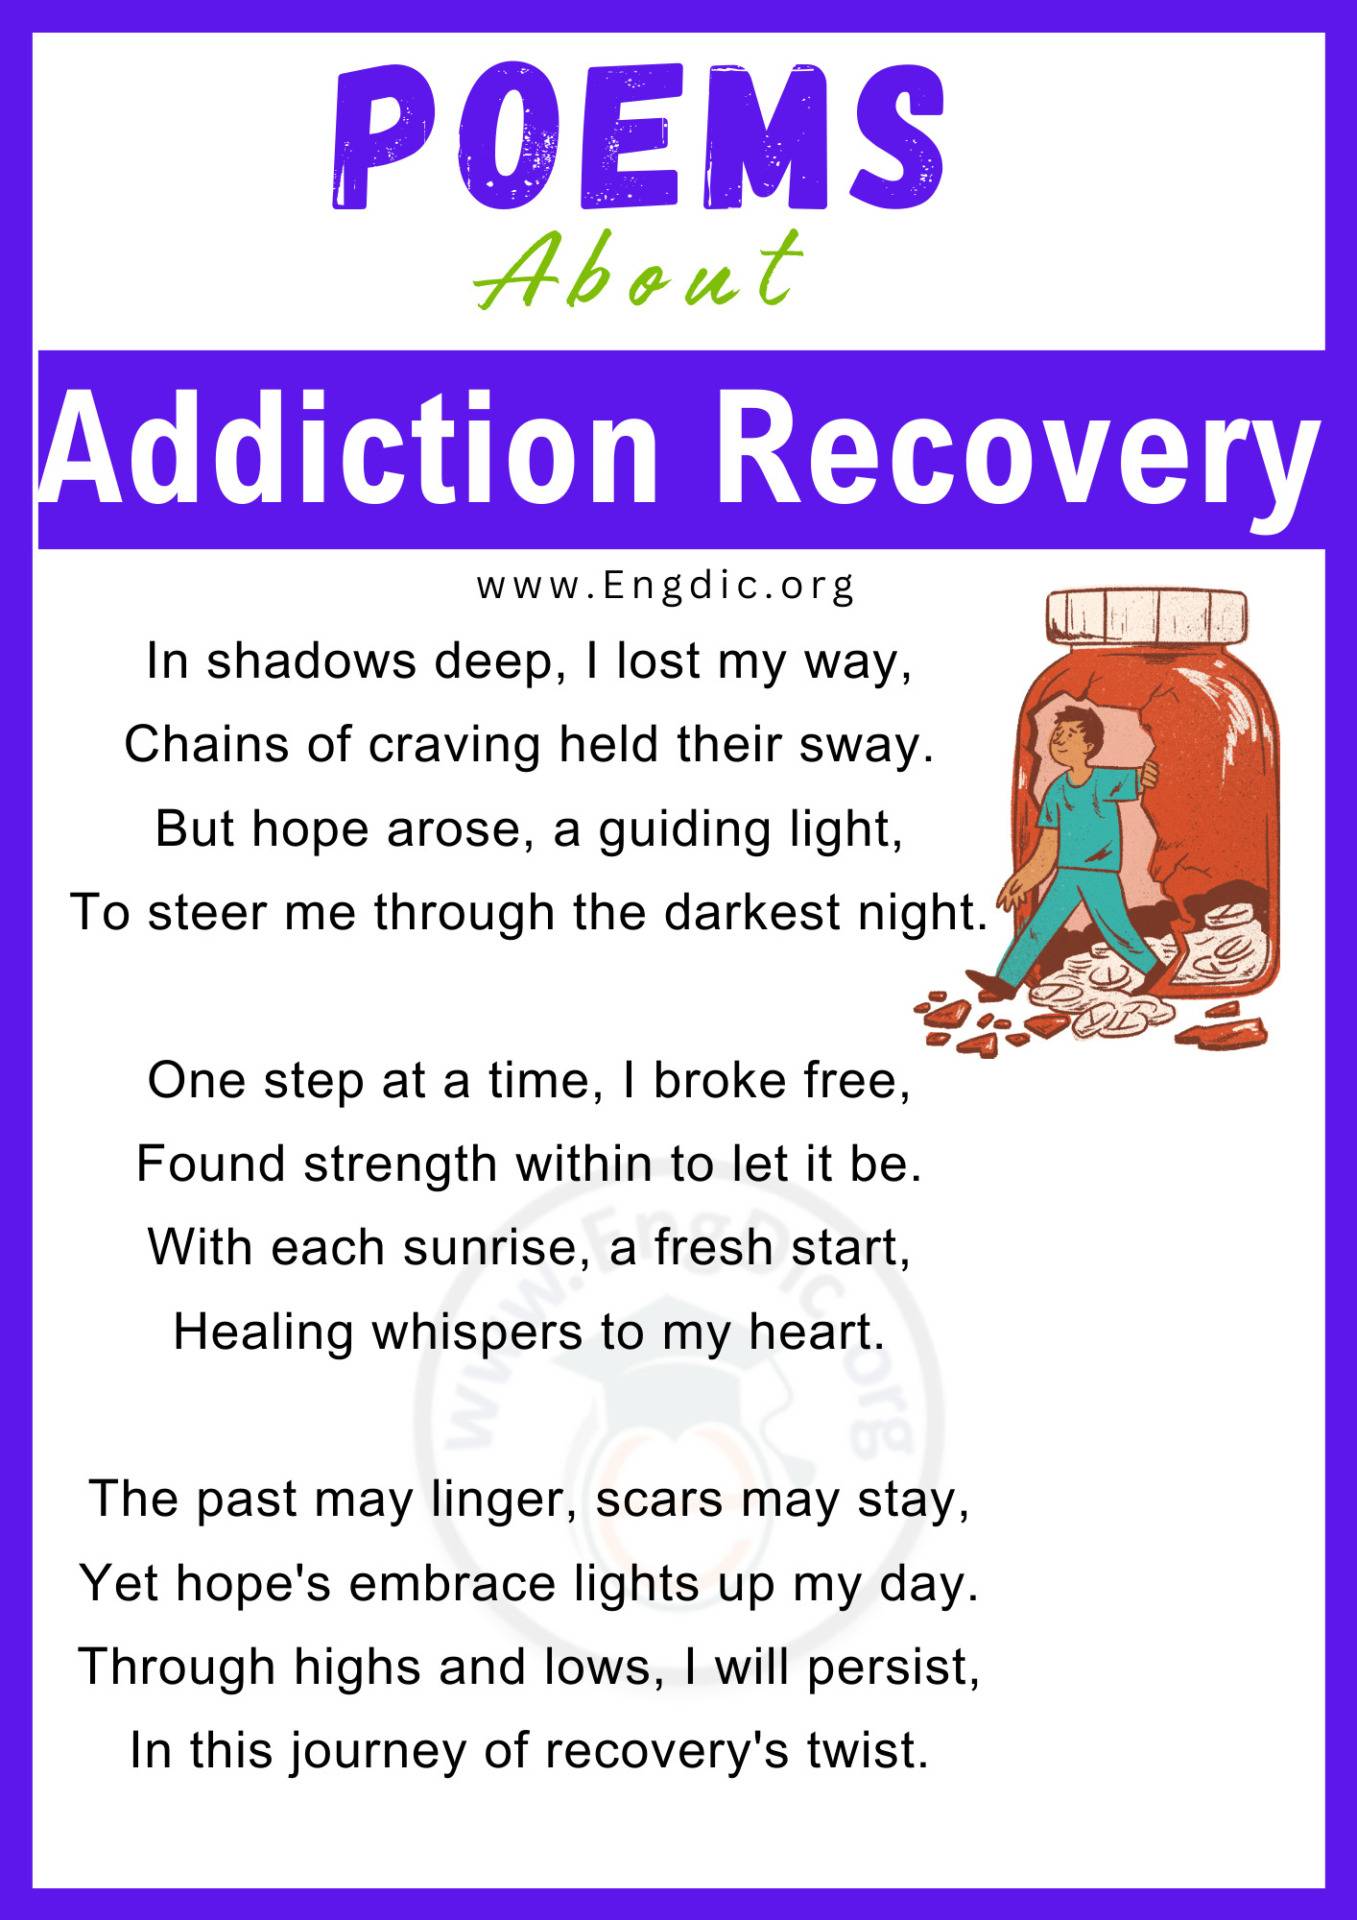 20+ Short Poems about Addiction Recovery - EngDic